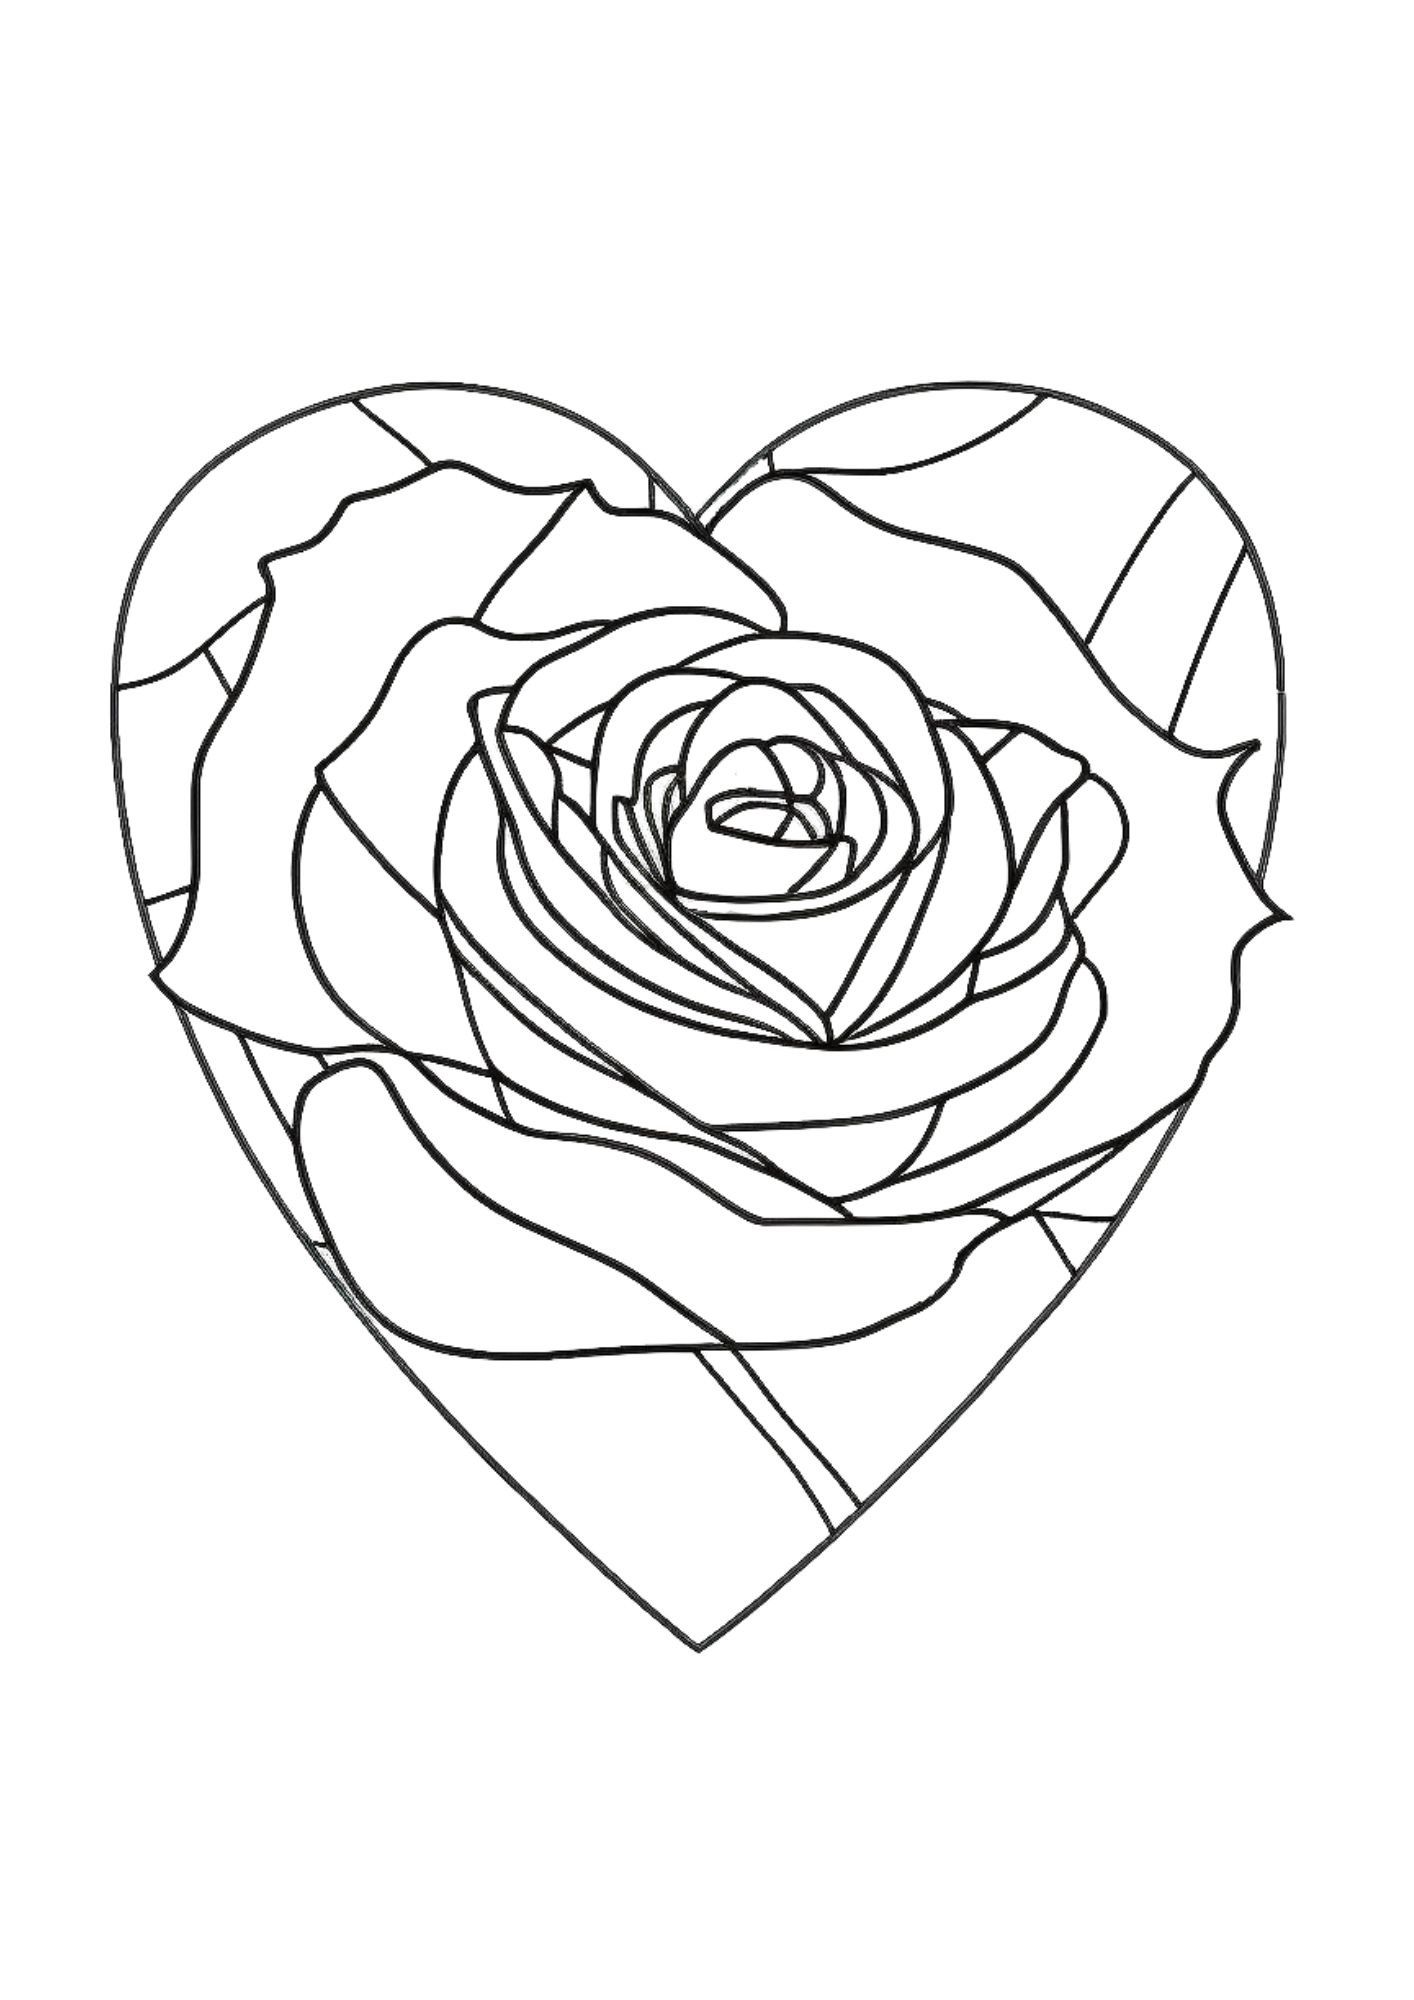 Free Printable Roses Coloring Pages for Adults and Kids - Coloring Oasis